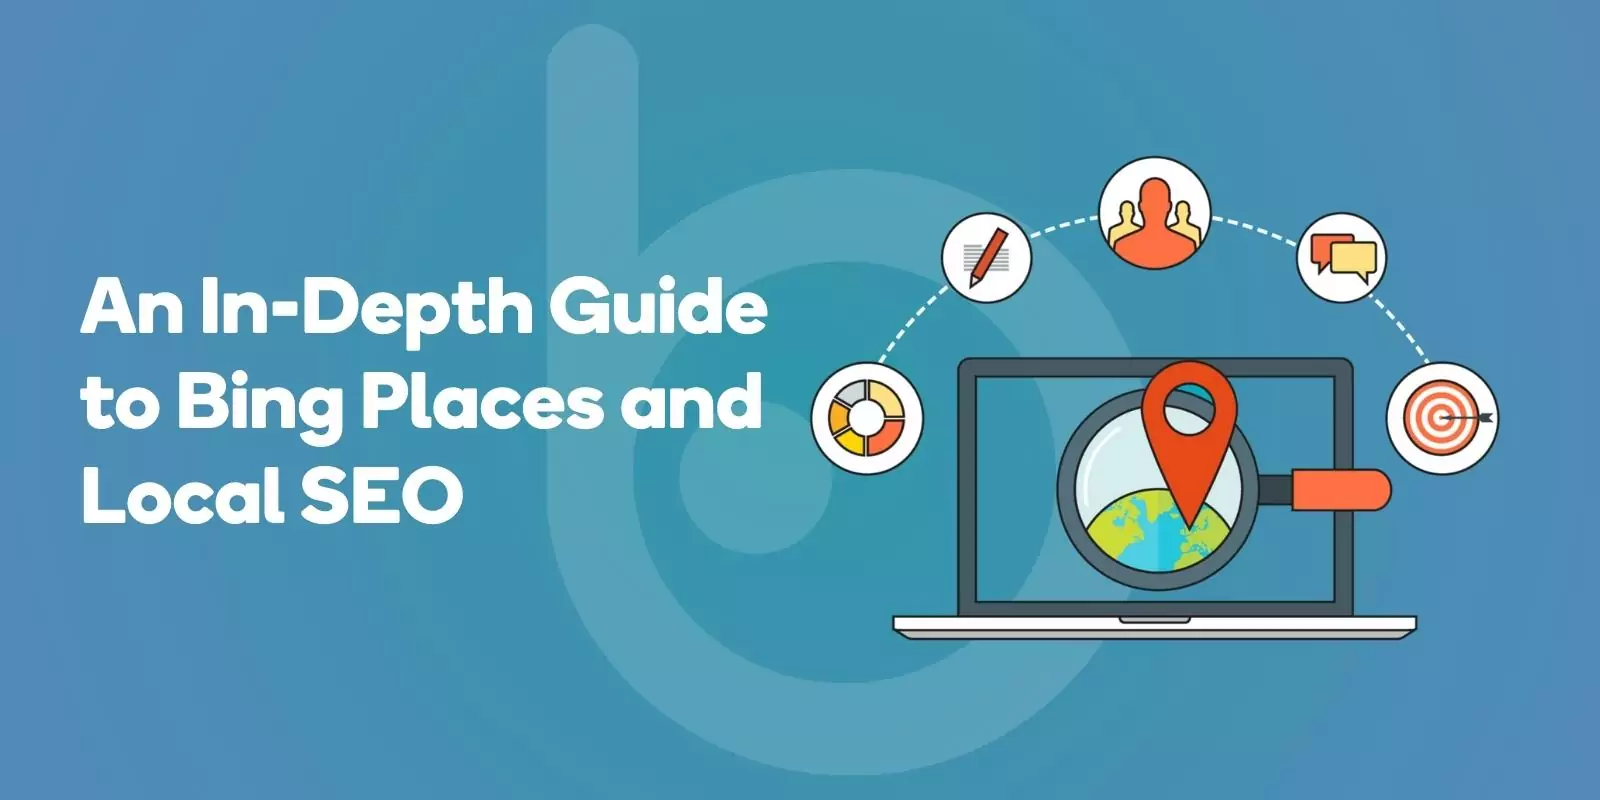 An In-Depth Guide to Bing Places and Local SEO